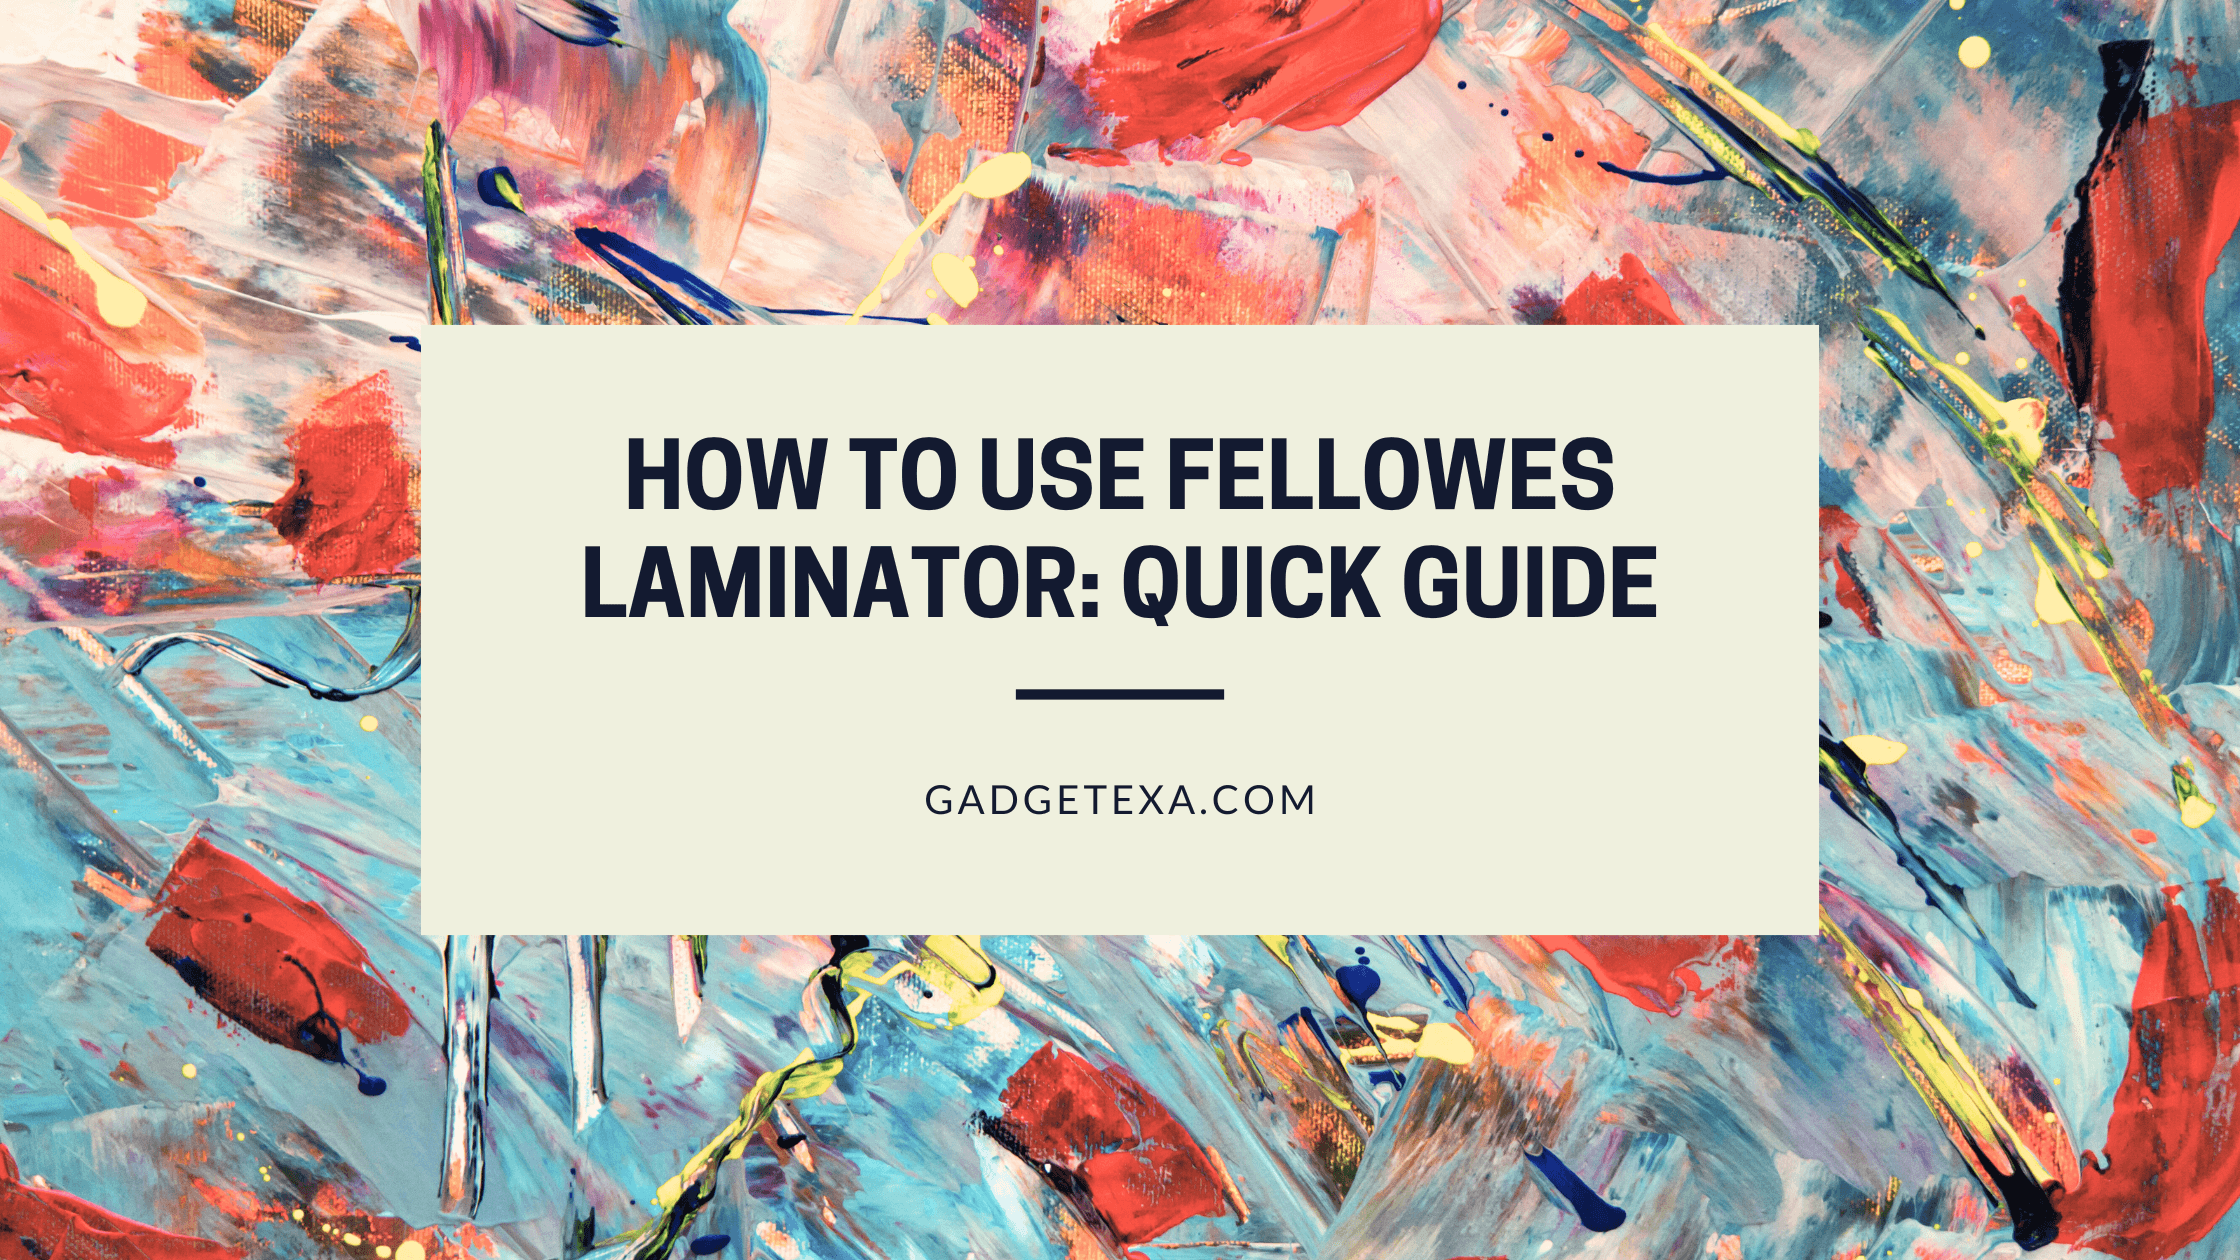 How to Use Fellowes Laminator Quick Guide (1)